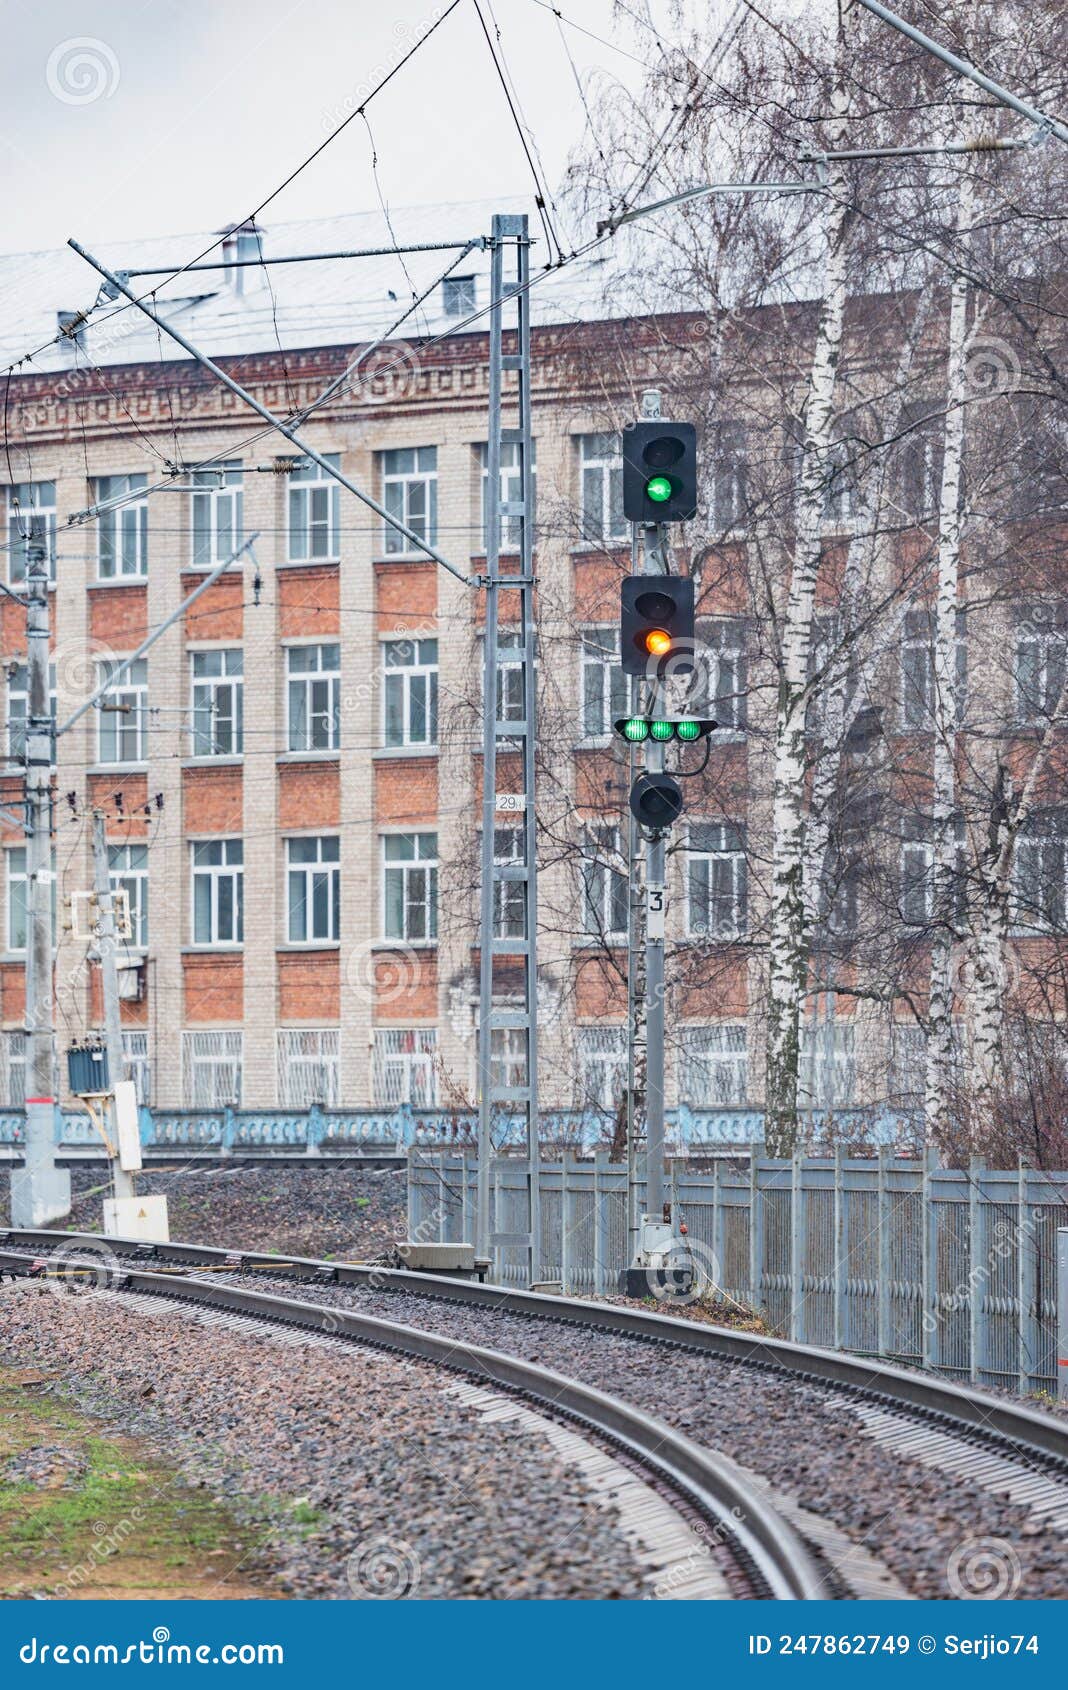 trafficlight by the railway track